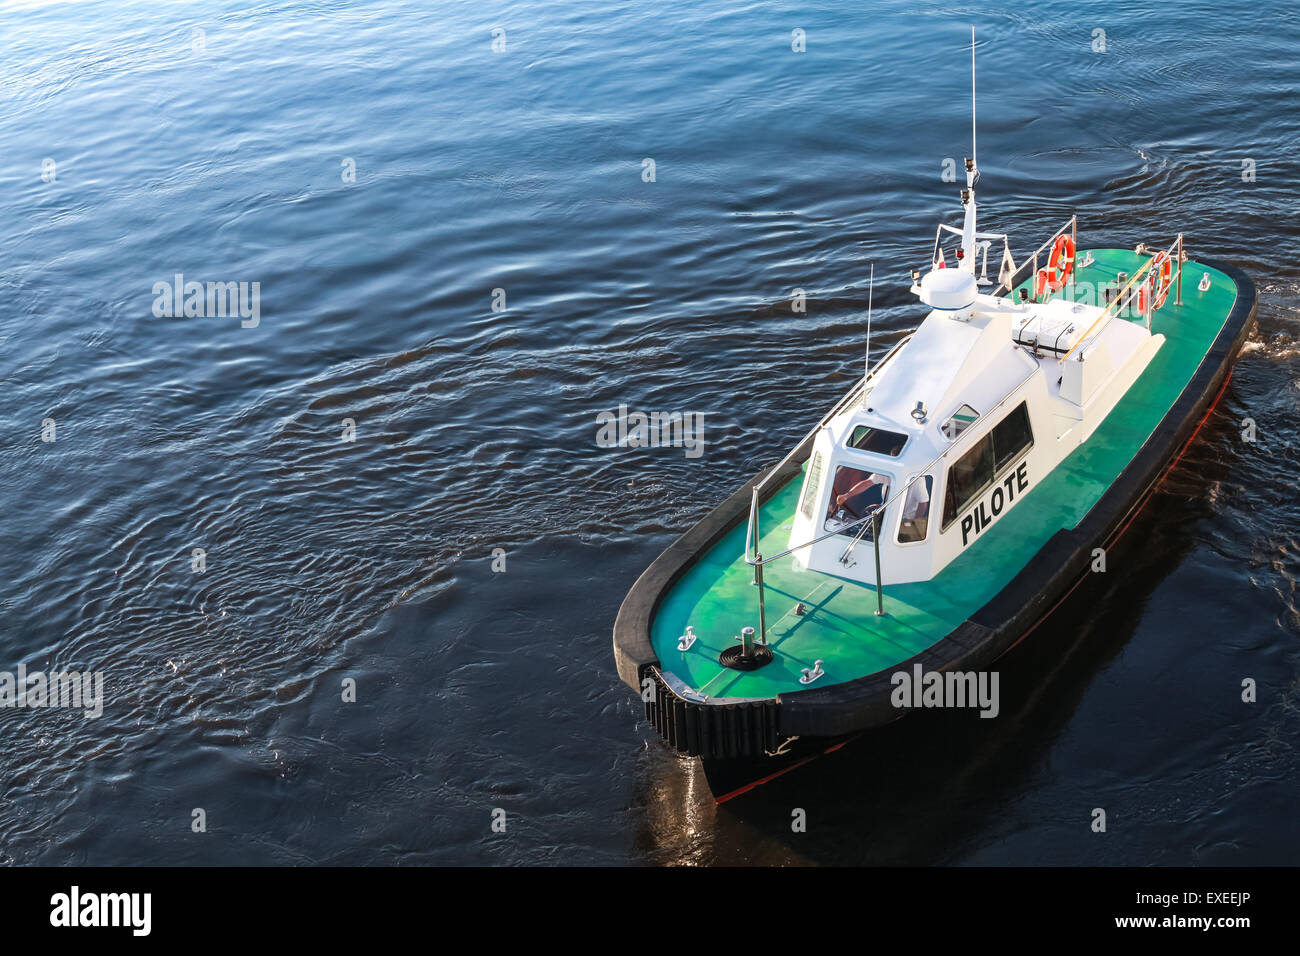 Small pilot boat with green deck on a sea water Stock Photo